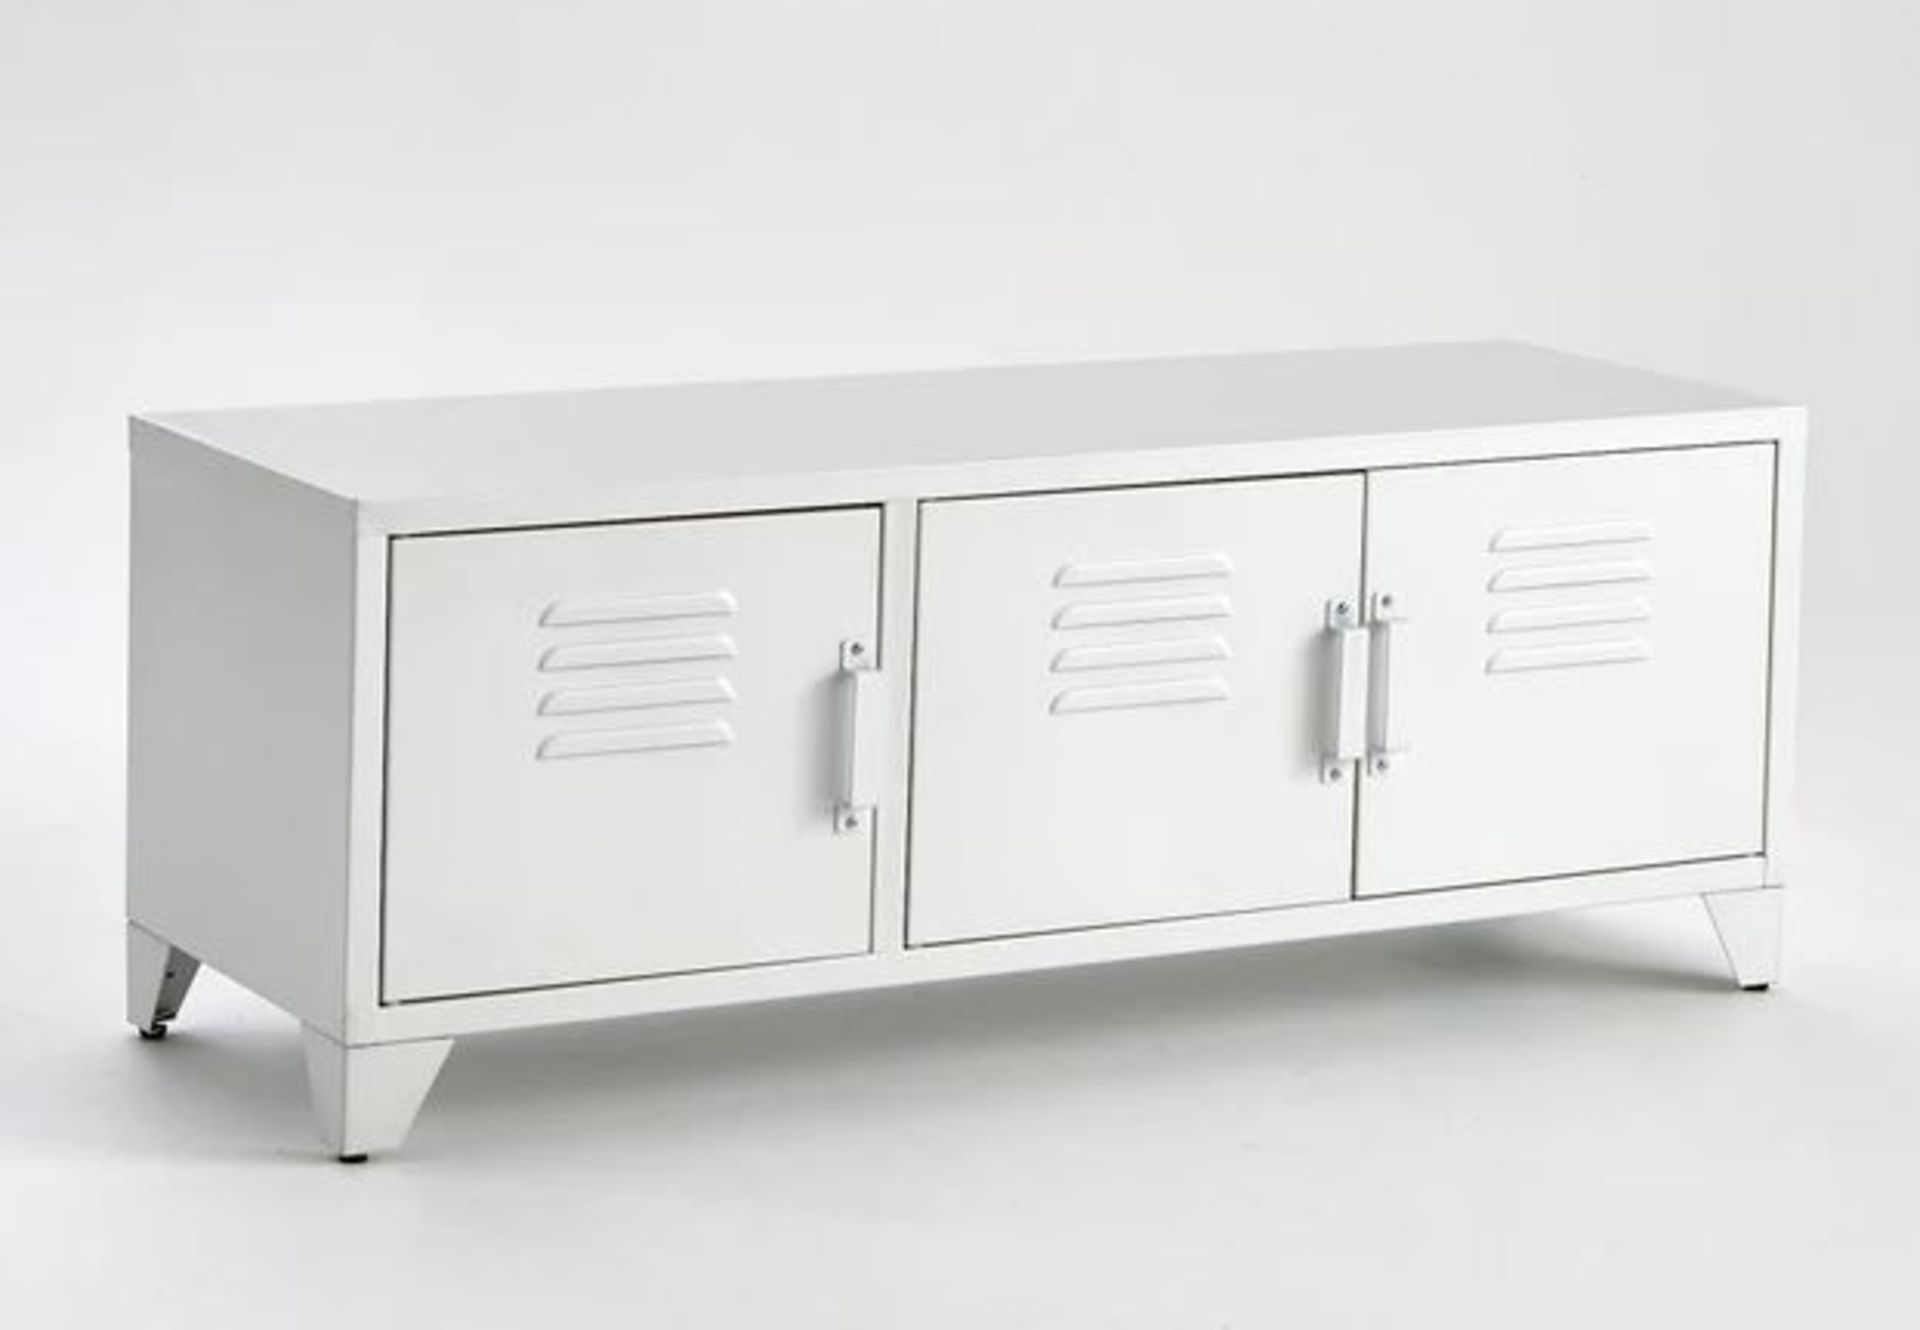 LA REDOUTE HIBA MATTE WHITE INDUSTRIAL STYLE TV UNIT WITH 3 DOORS